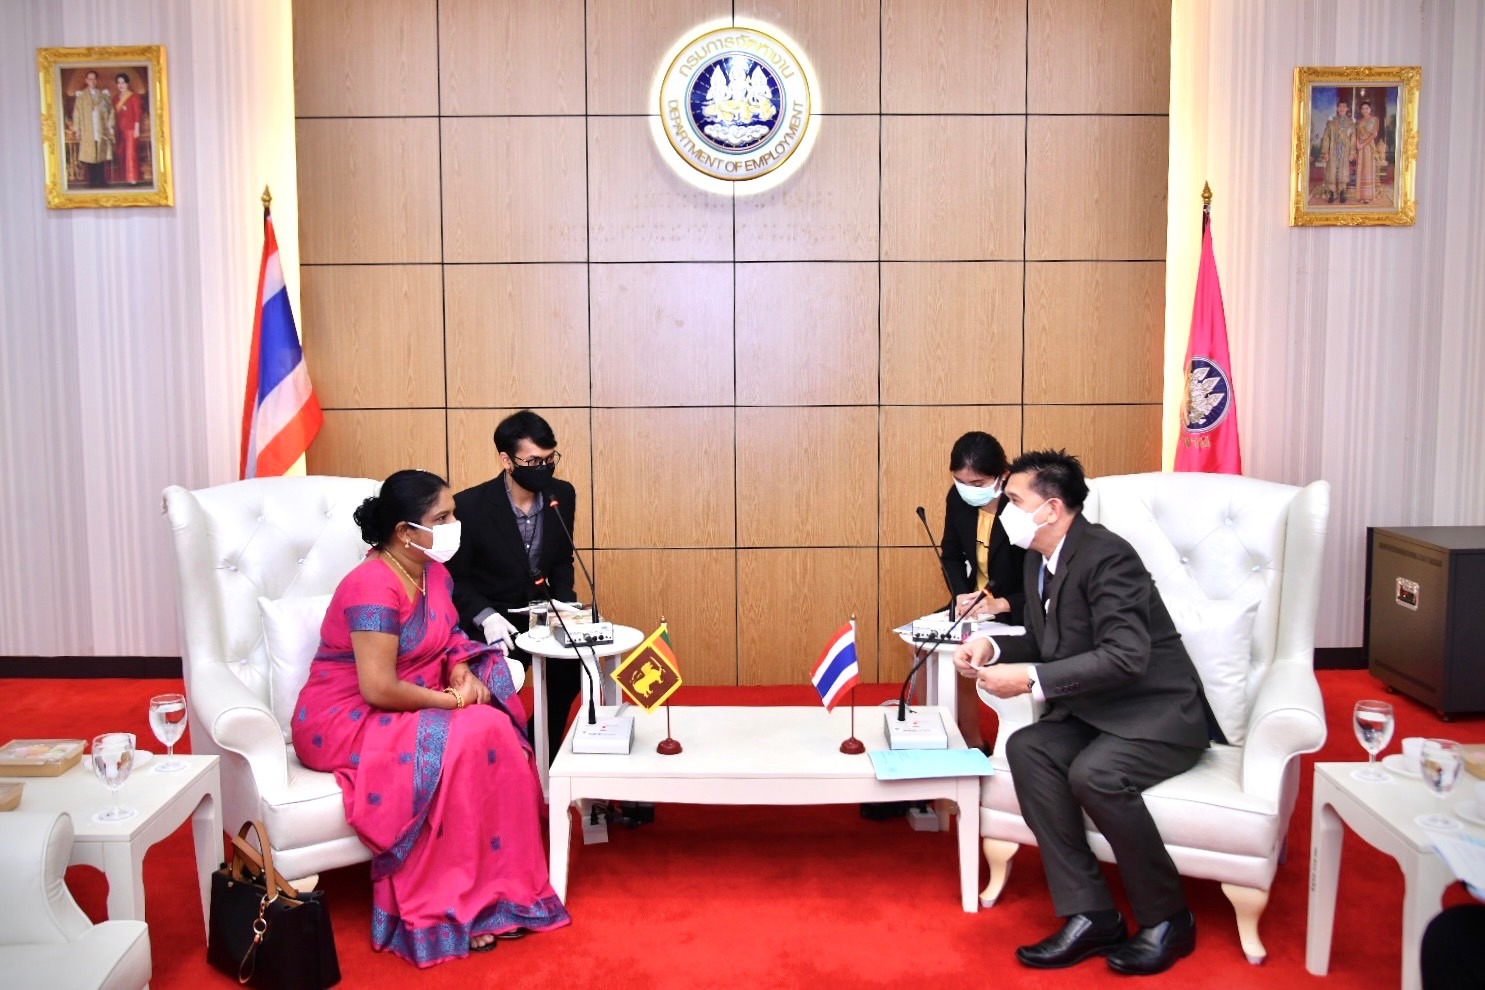 Ambassador of Sri Lanka to the Kingdom of Thailand and Permanent Representative to the UNESCAP, C.A. Chaminda I. Colonne called on the Ministry of Labour, Director General of the Department of Employment in Thailand, Pairoj Chotikasathien on 17.03.2022 and discussed on enhancing employment opportunities in Thailand for Sri Lanka